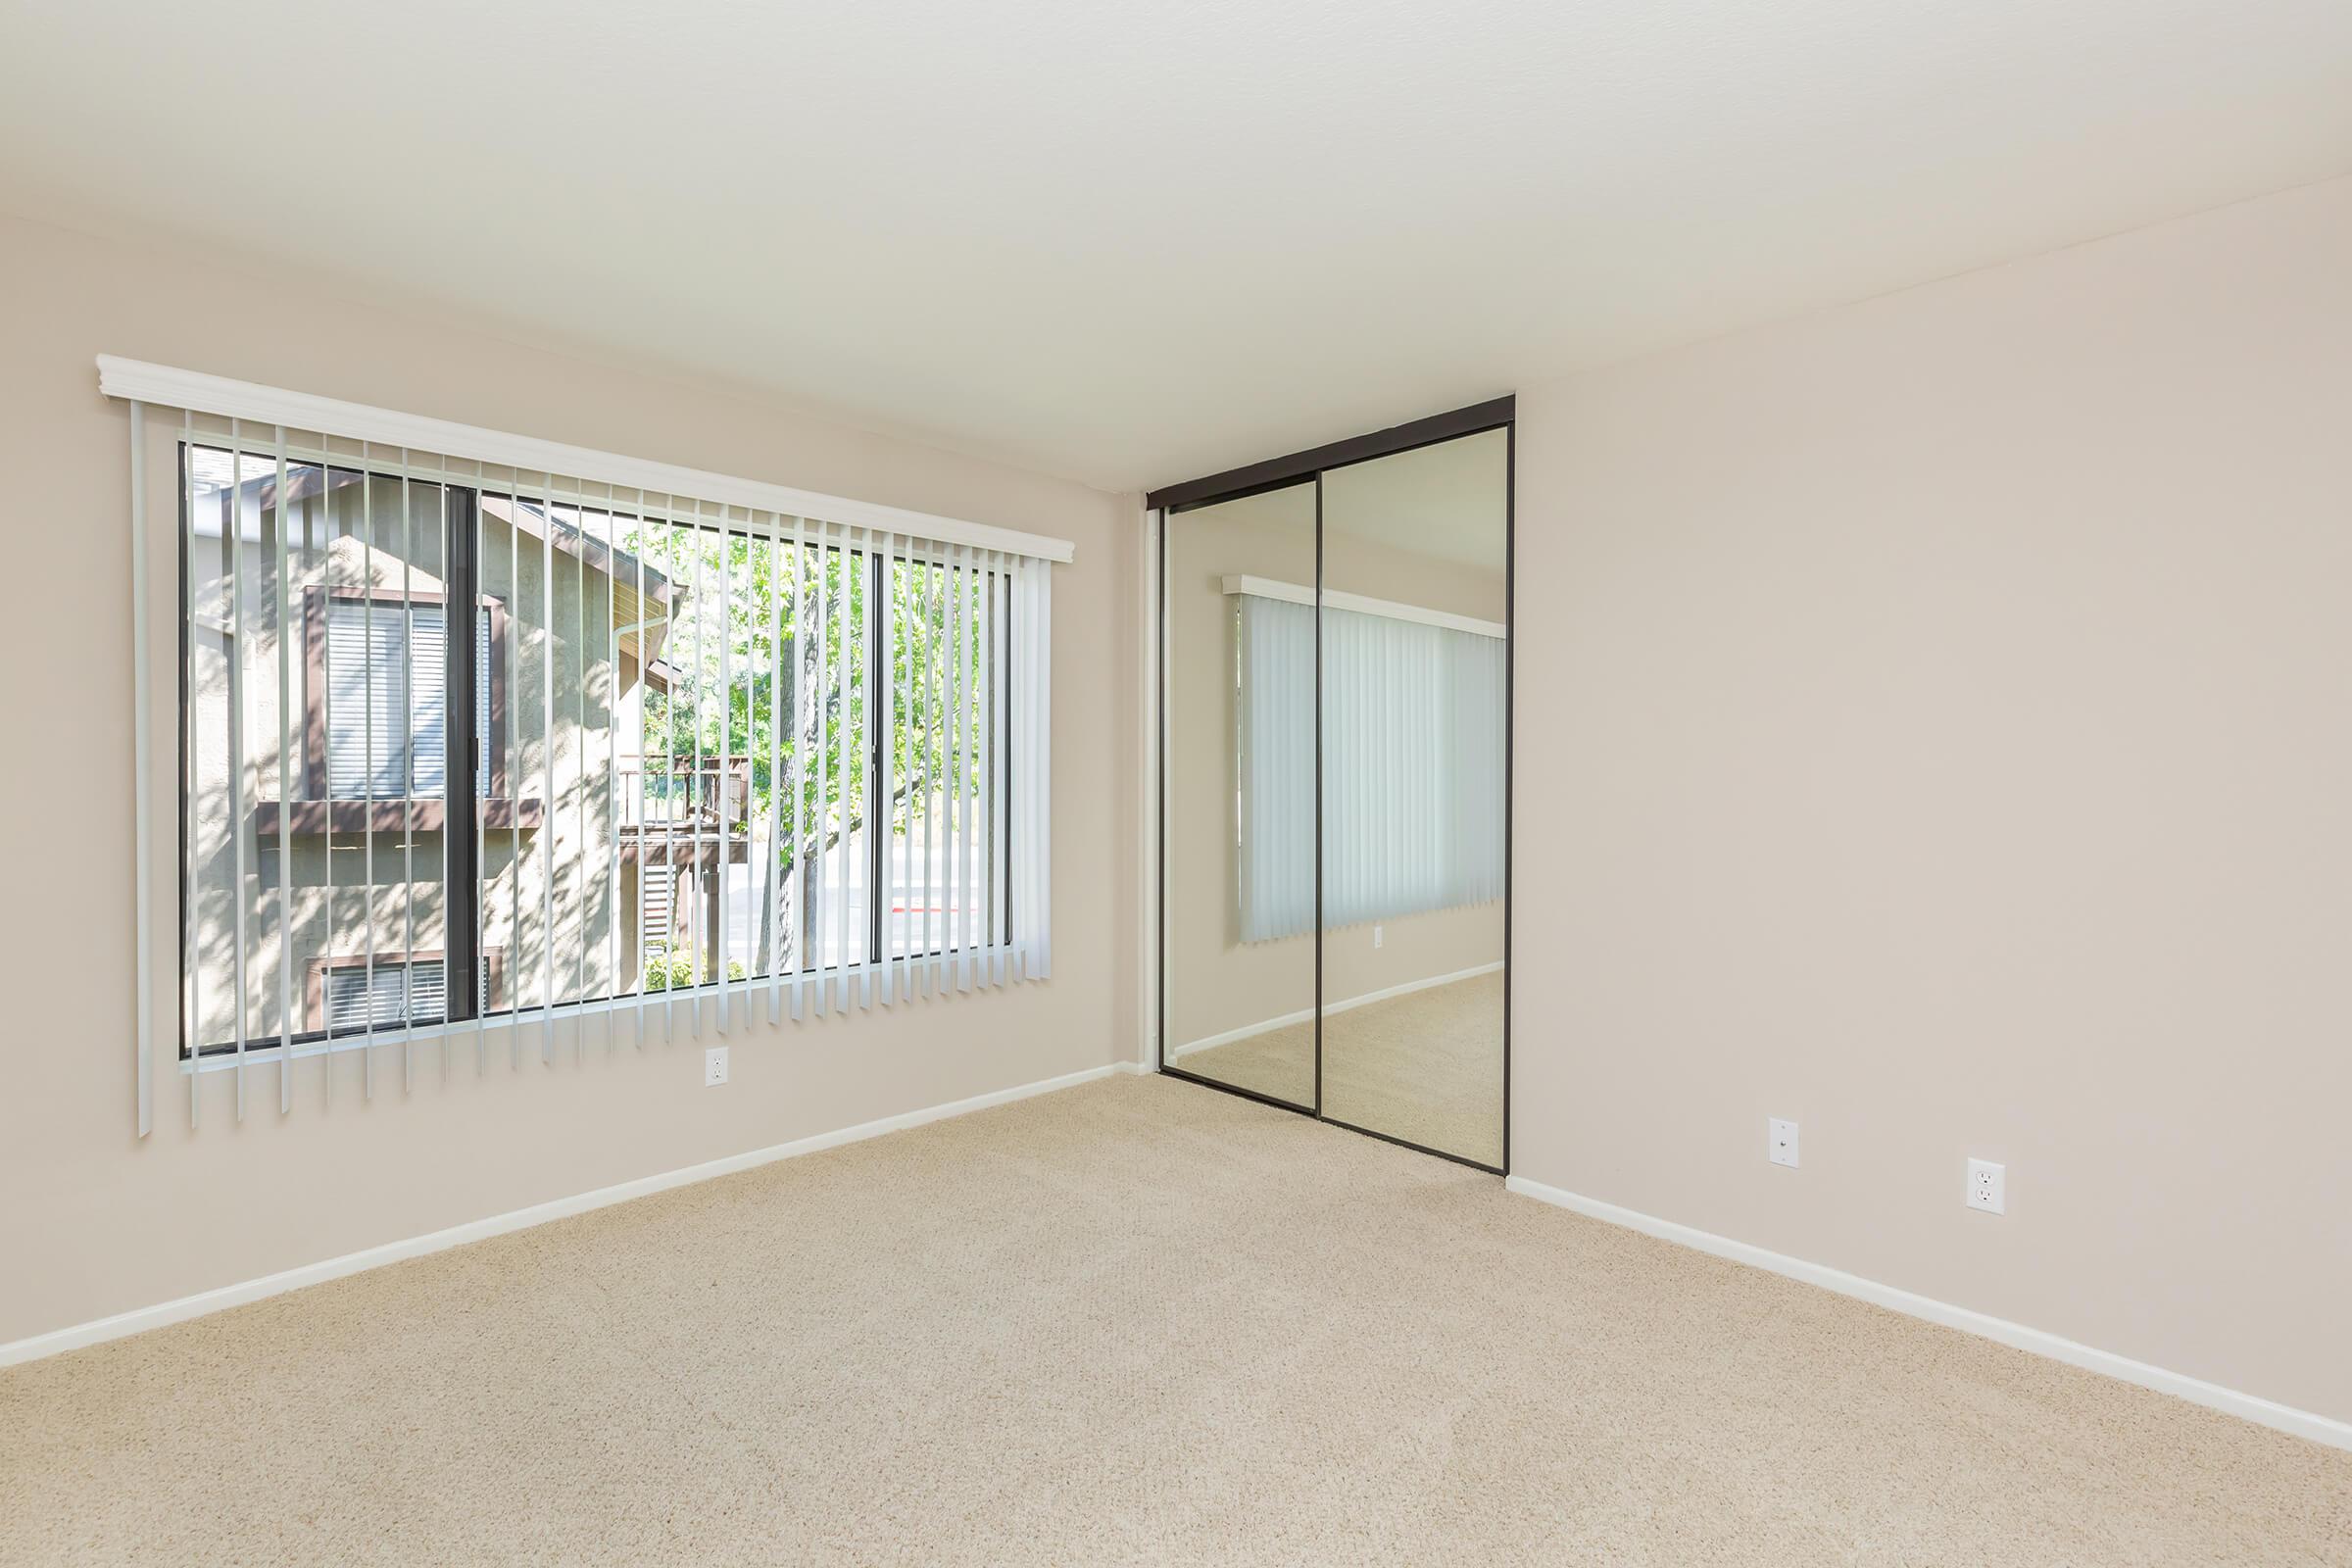 Unfurnished bedroom with sliding mirror glass closet doors